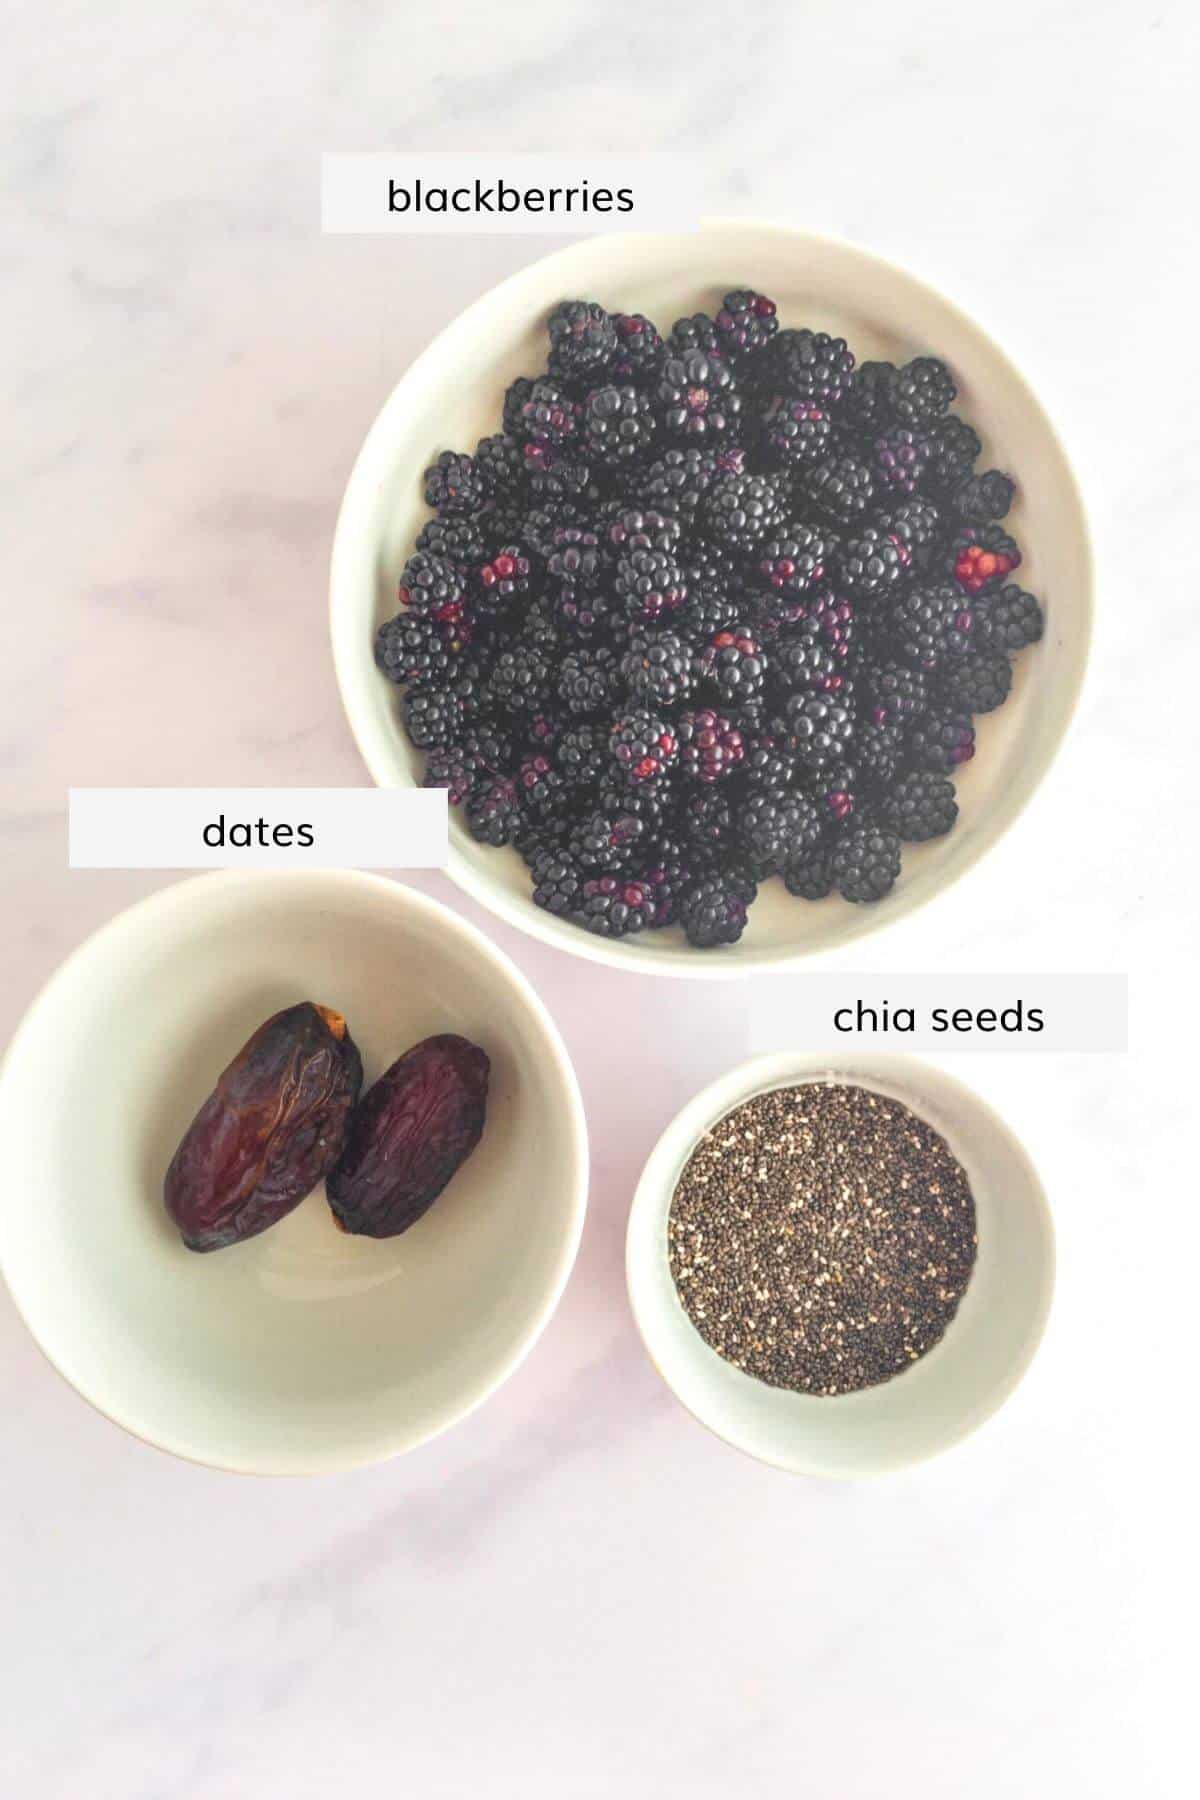 A bowl of blackberries, a bowl with chia seeds and a bowl containing two dates sit on a marble work surface. They ingredients are labelled.